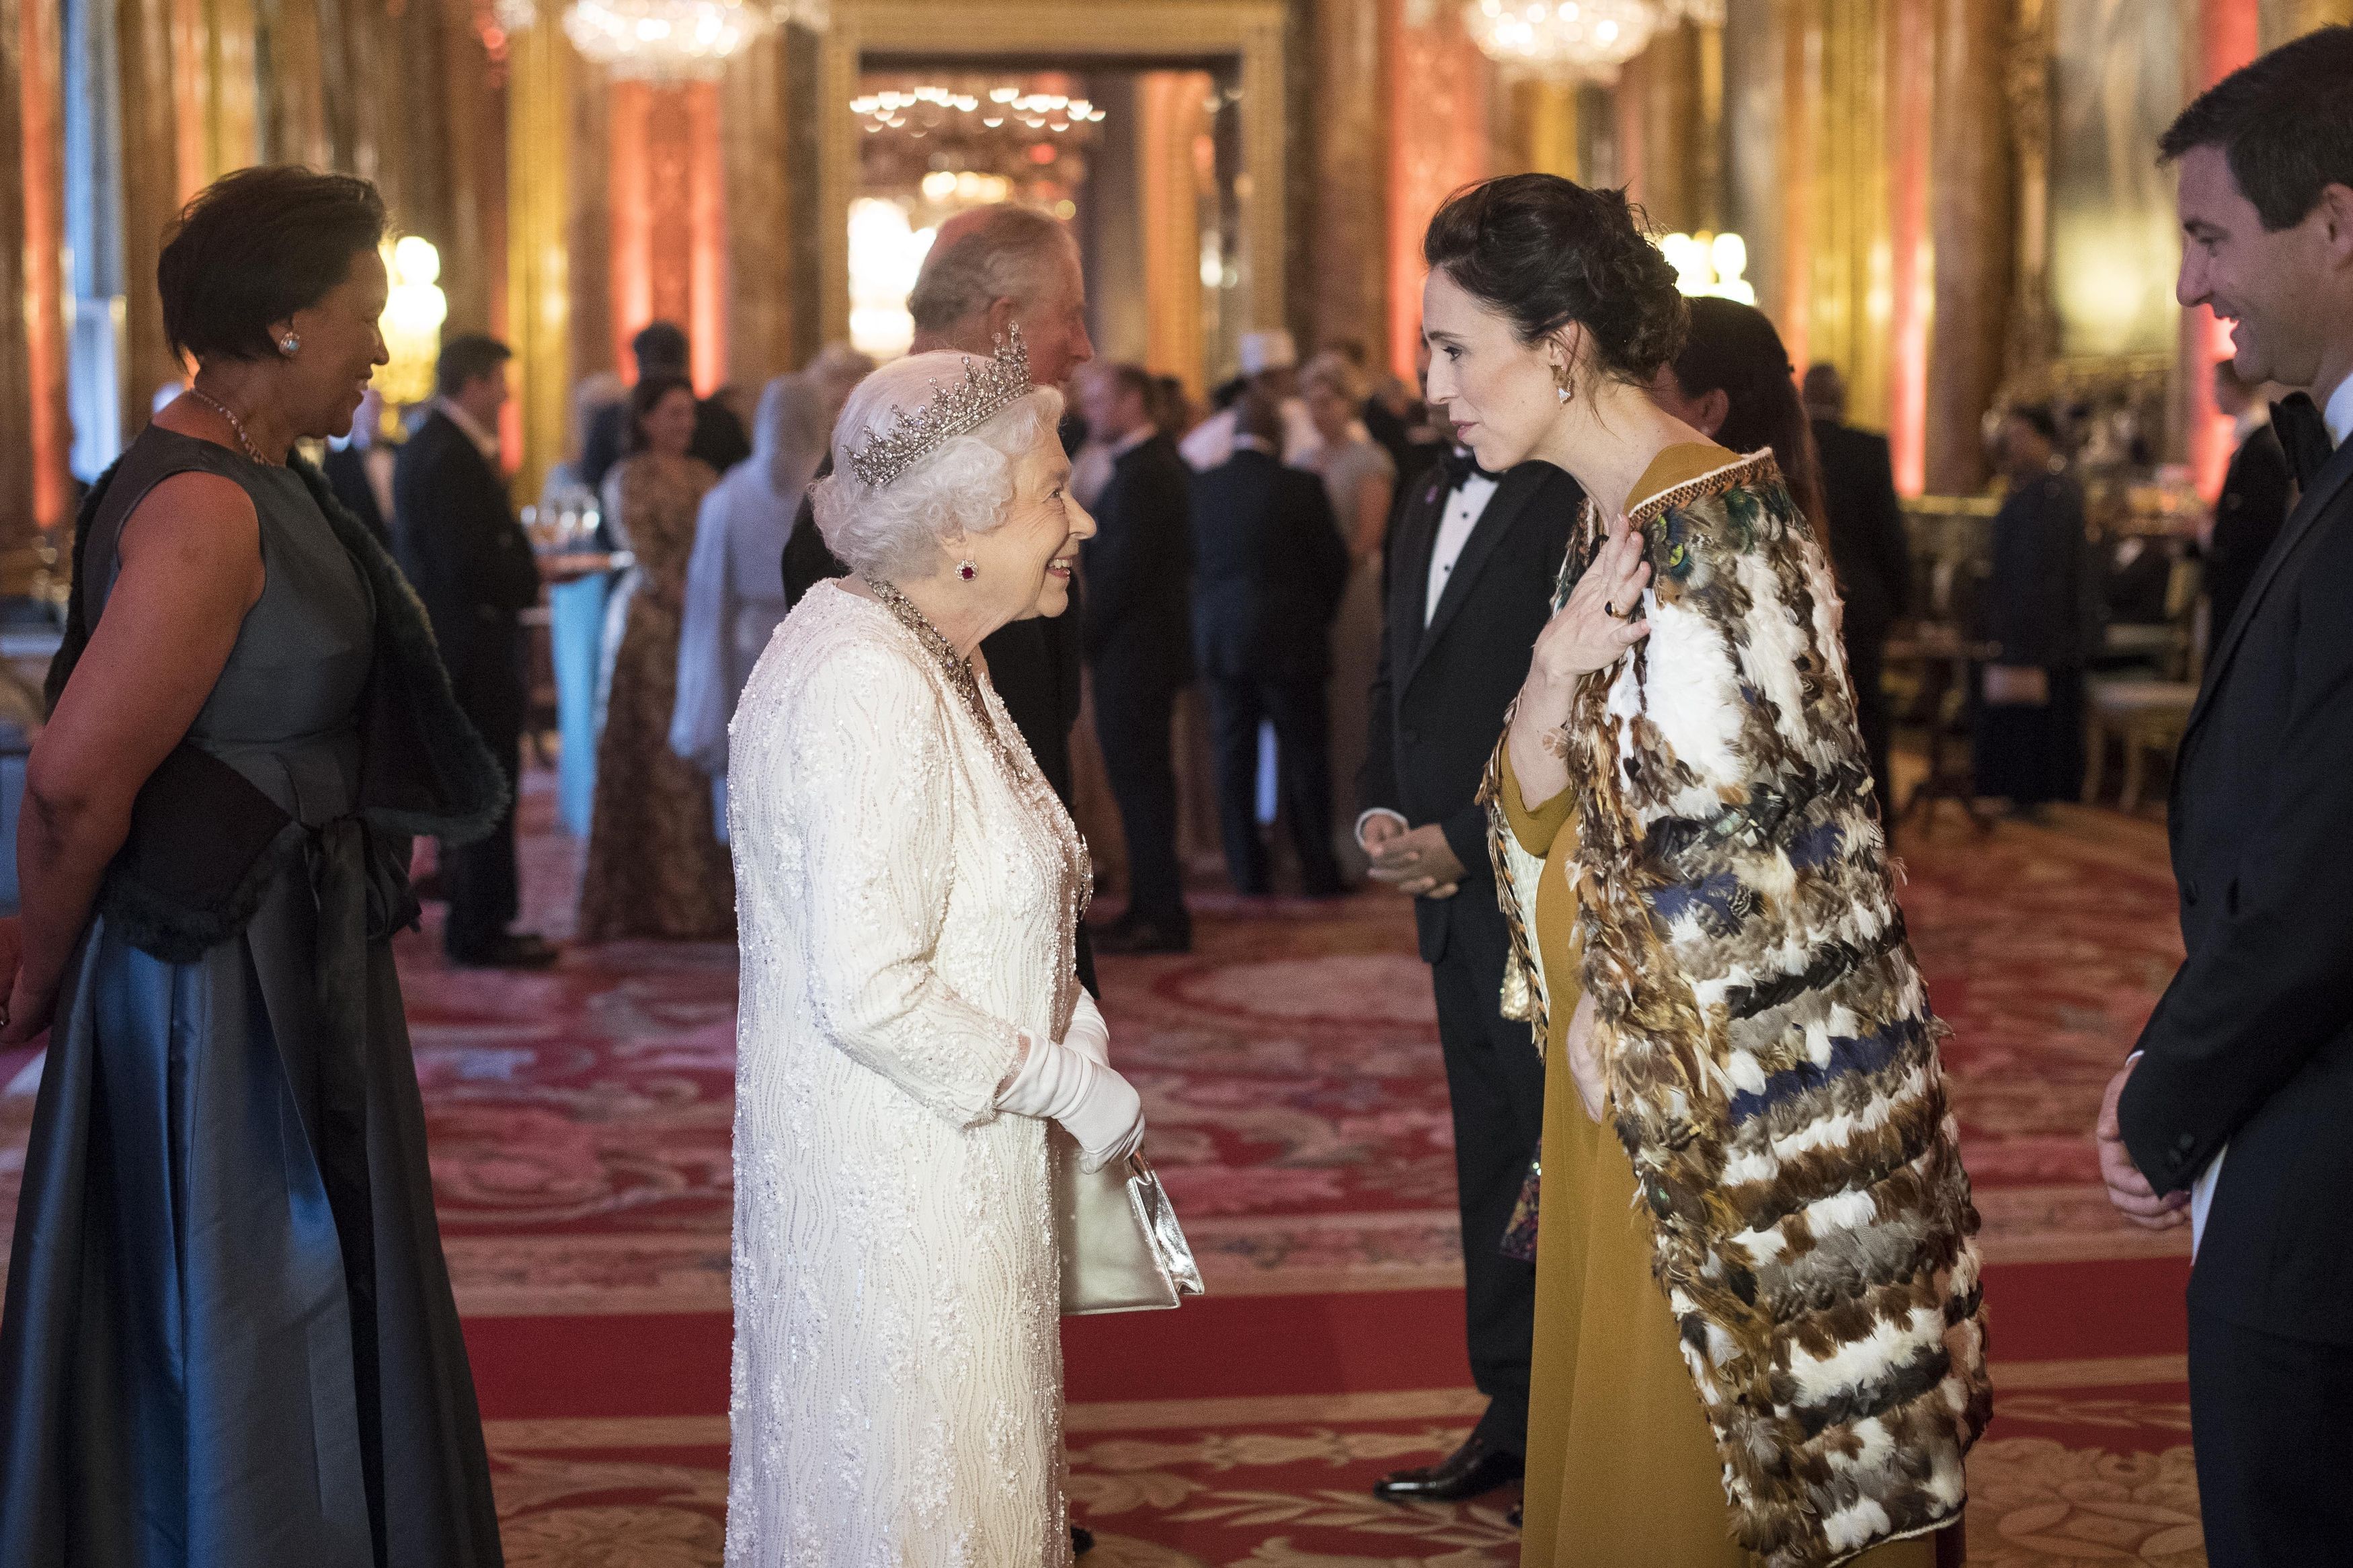 Queen Elizabeth II greets Jacinda Ardern, Prime Minister of New Zealand at during the Commonwealth Heads of Government Meeting at Buckingham Palace on April 19, 2018 in London, England. (Victoria Jones—WPA Pool/Getty Images)